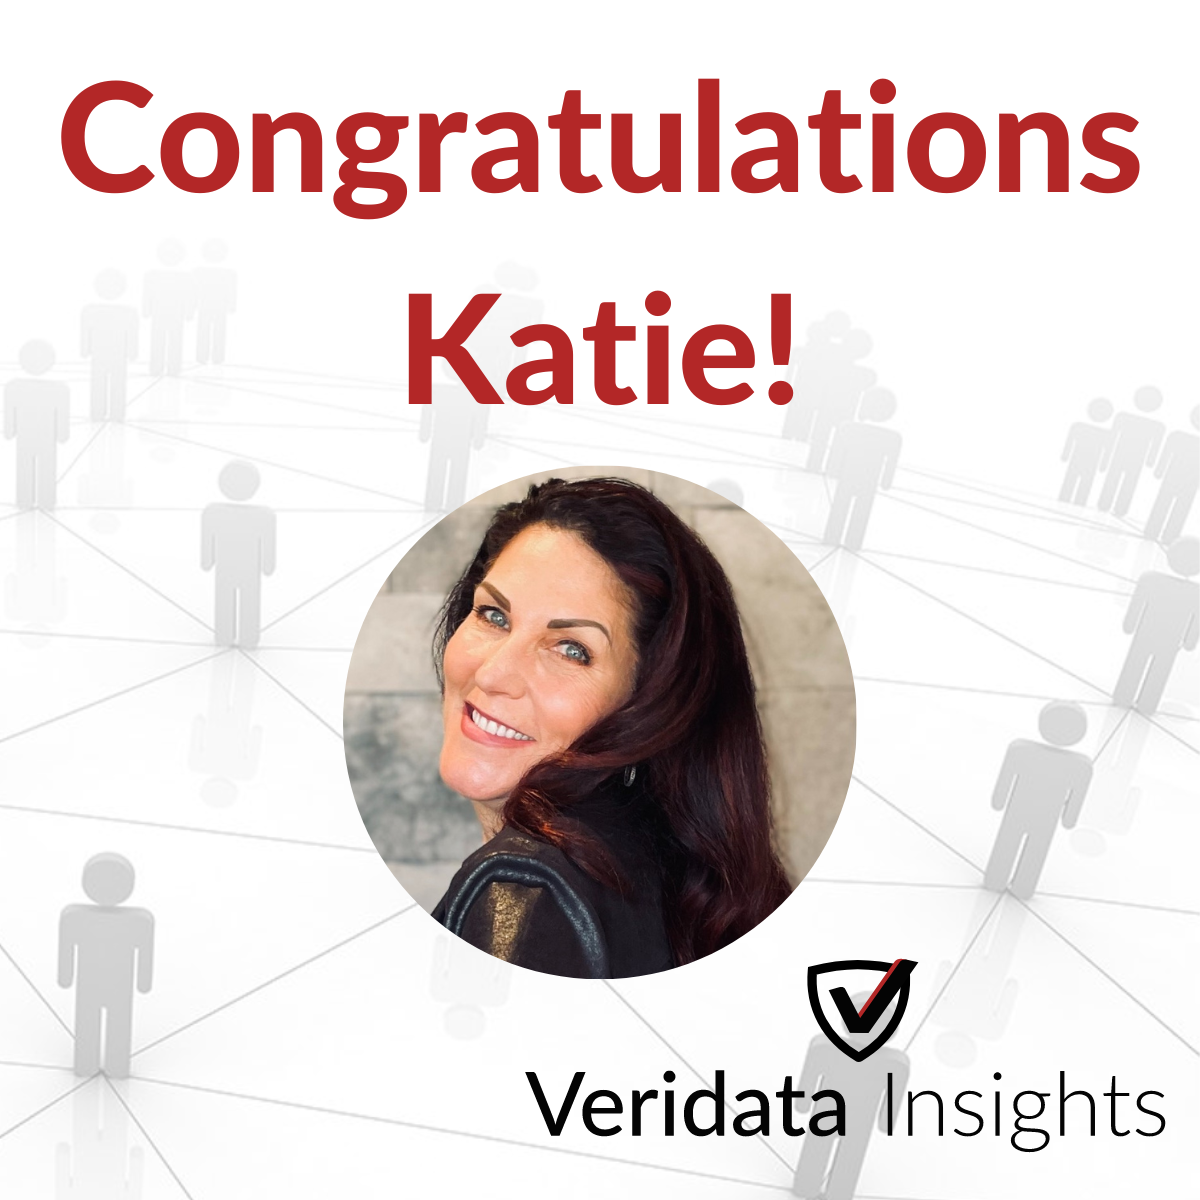 The promotions just keep on coming at Veridata Insights! We are overjoyed to announce that Katie Ozdemir is now our President of Global Qualitative Solutions!